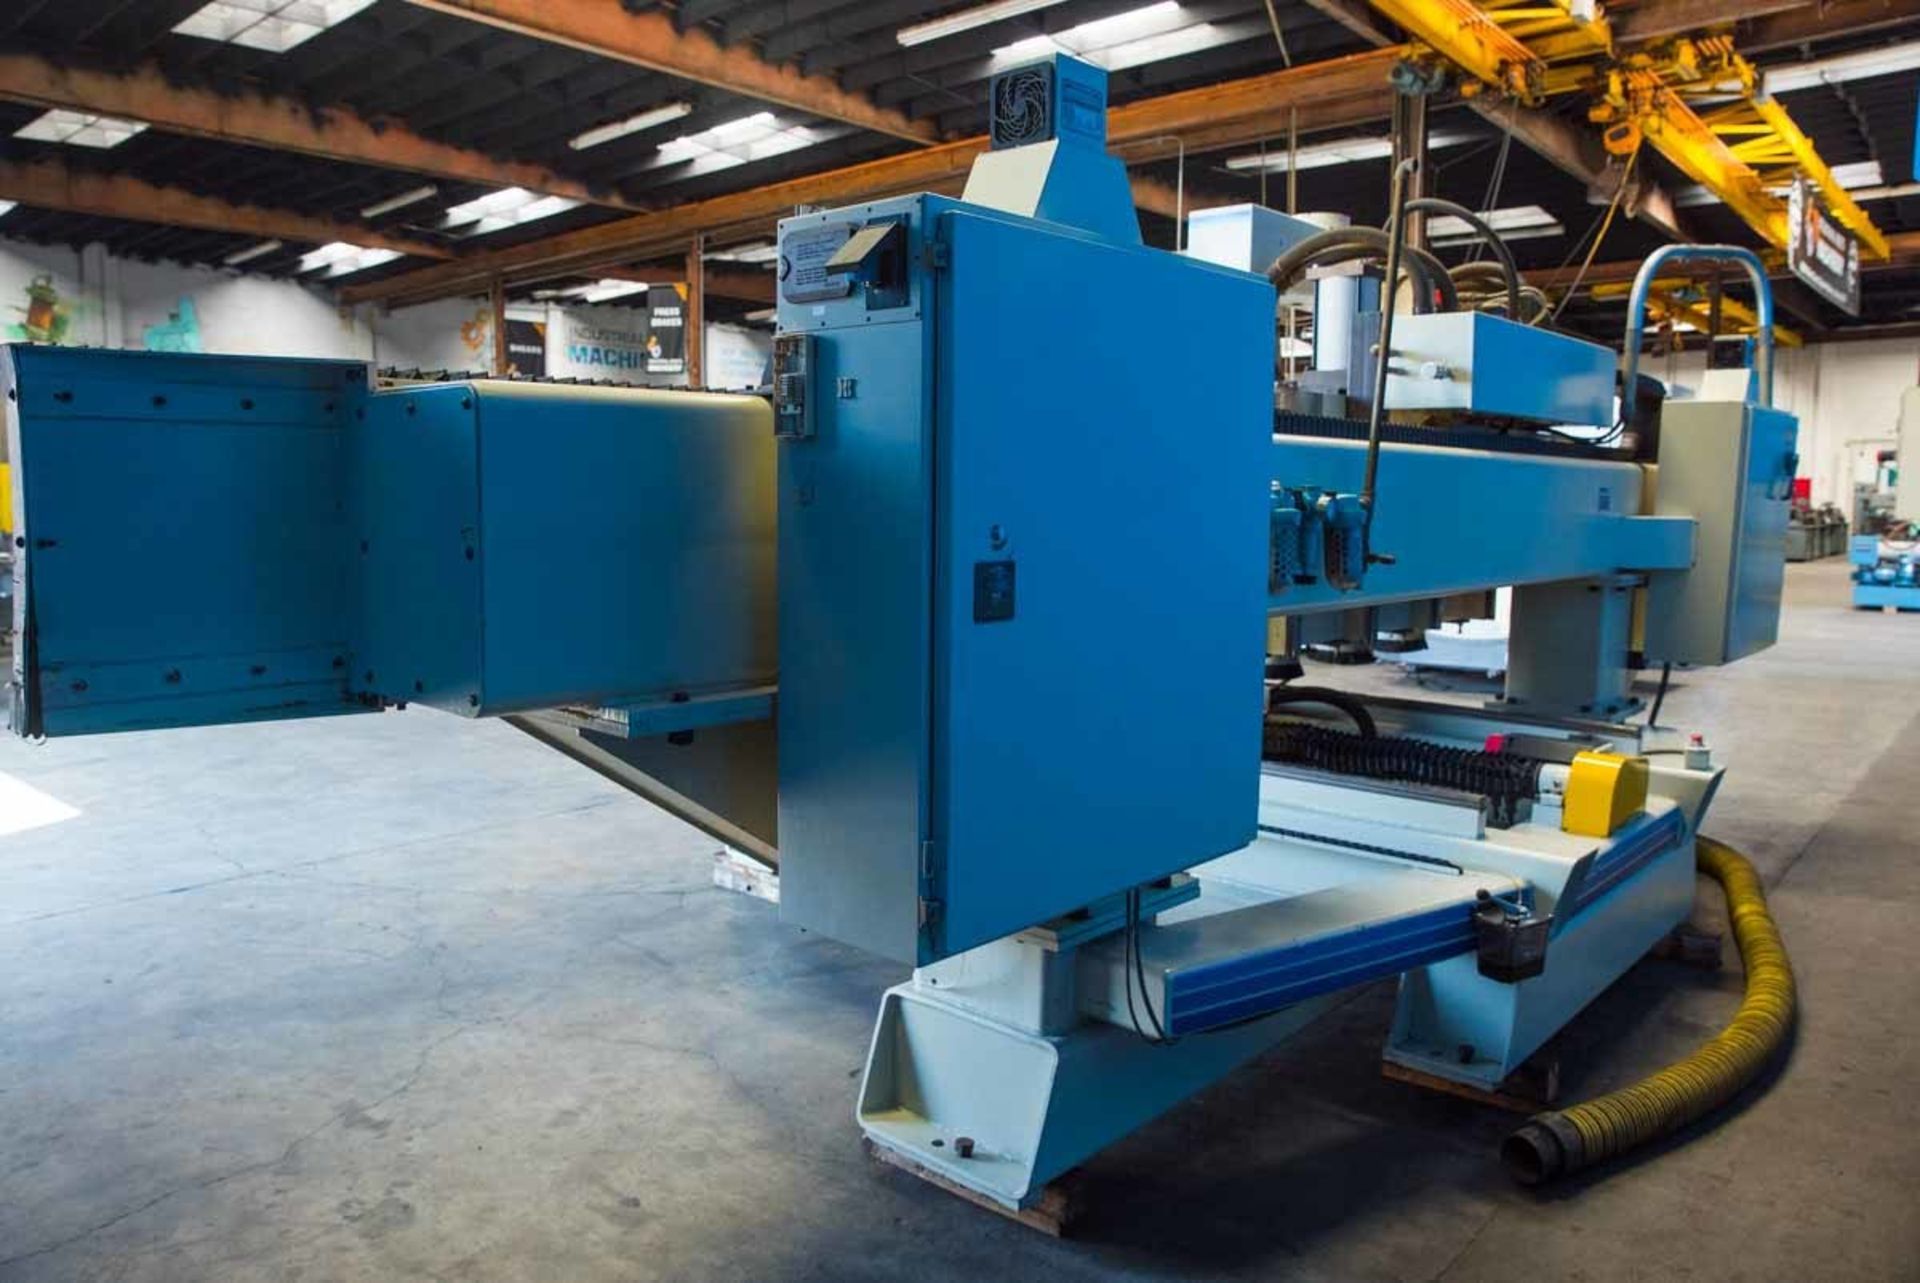 Komo VR805Q Fanuc CNC Metal Router 3 Axis 4 Spindle 96" x 60" Sheet Size - Located In: Huntington - Image 5 of 24